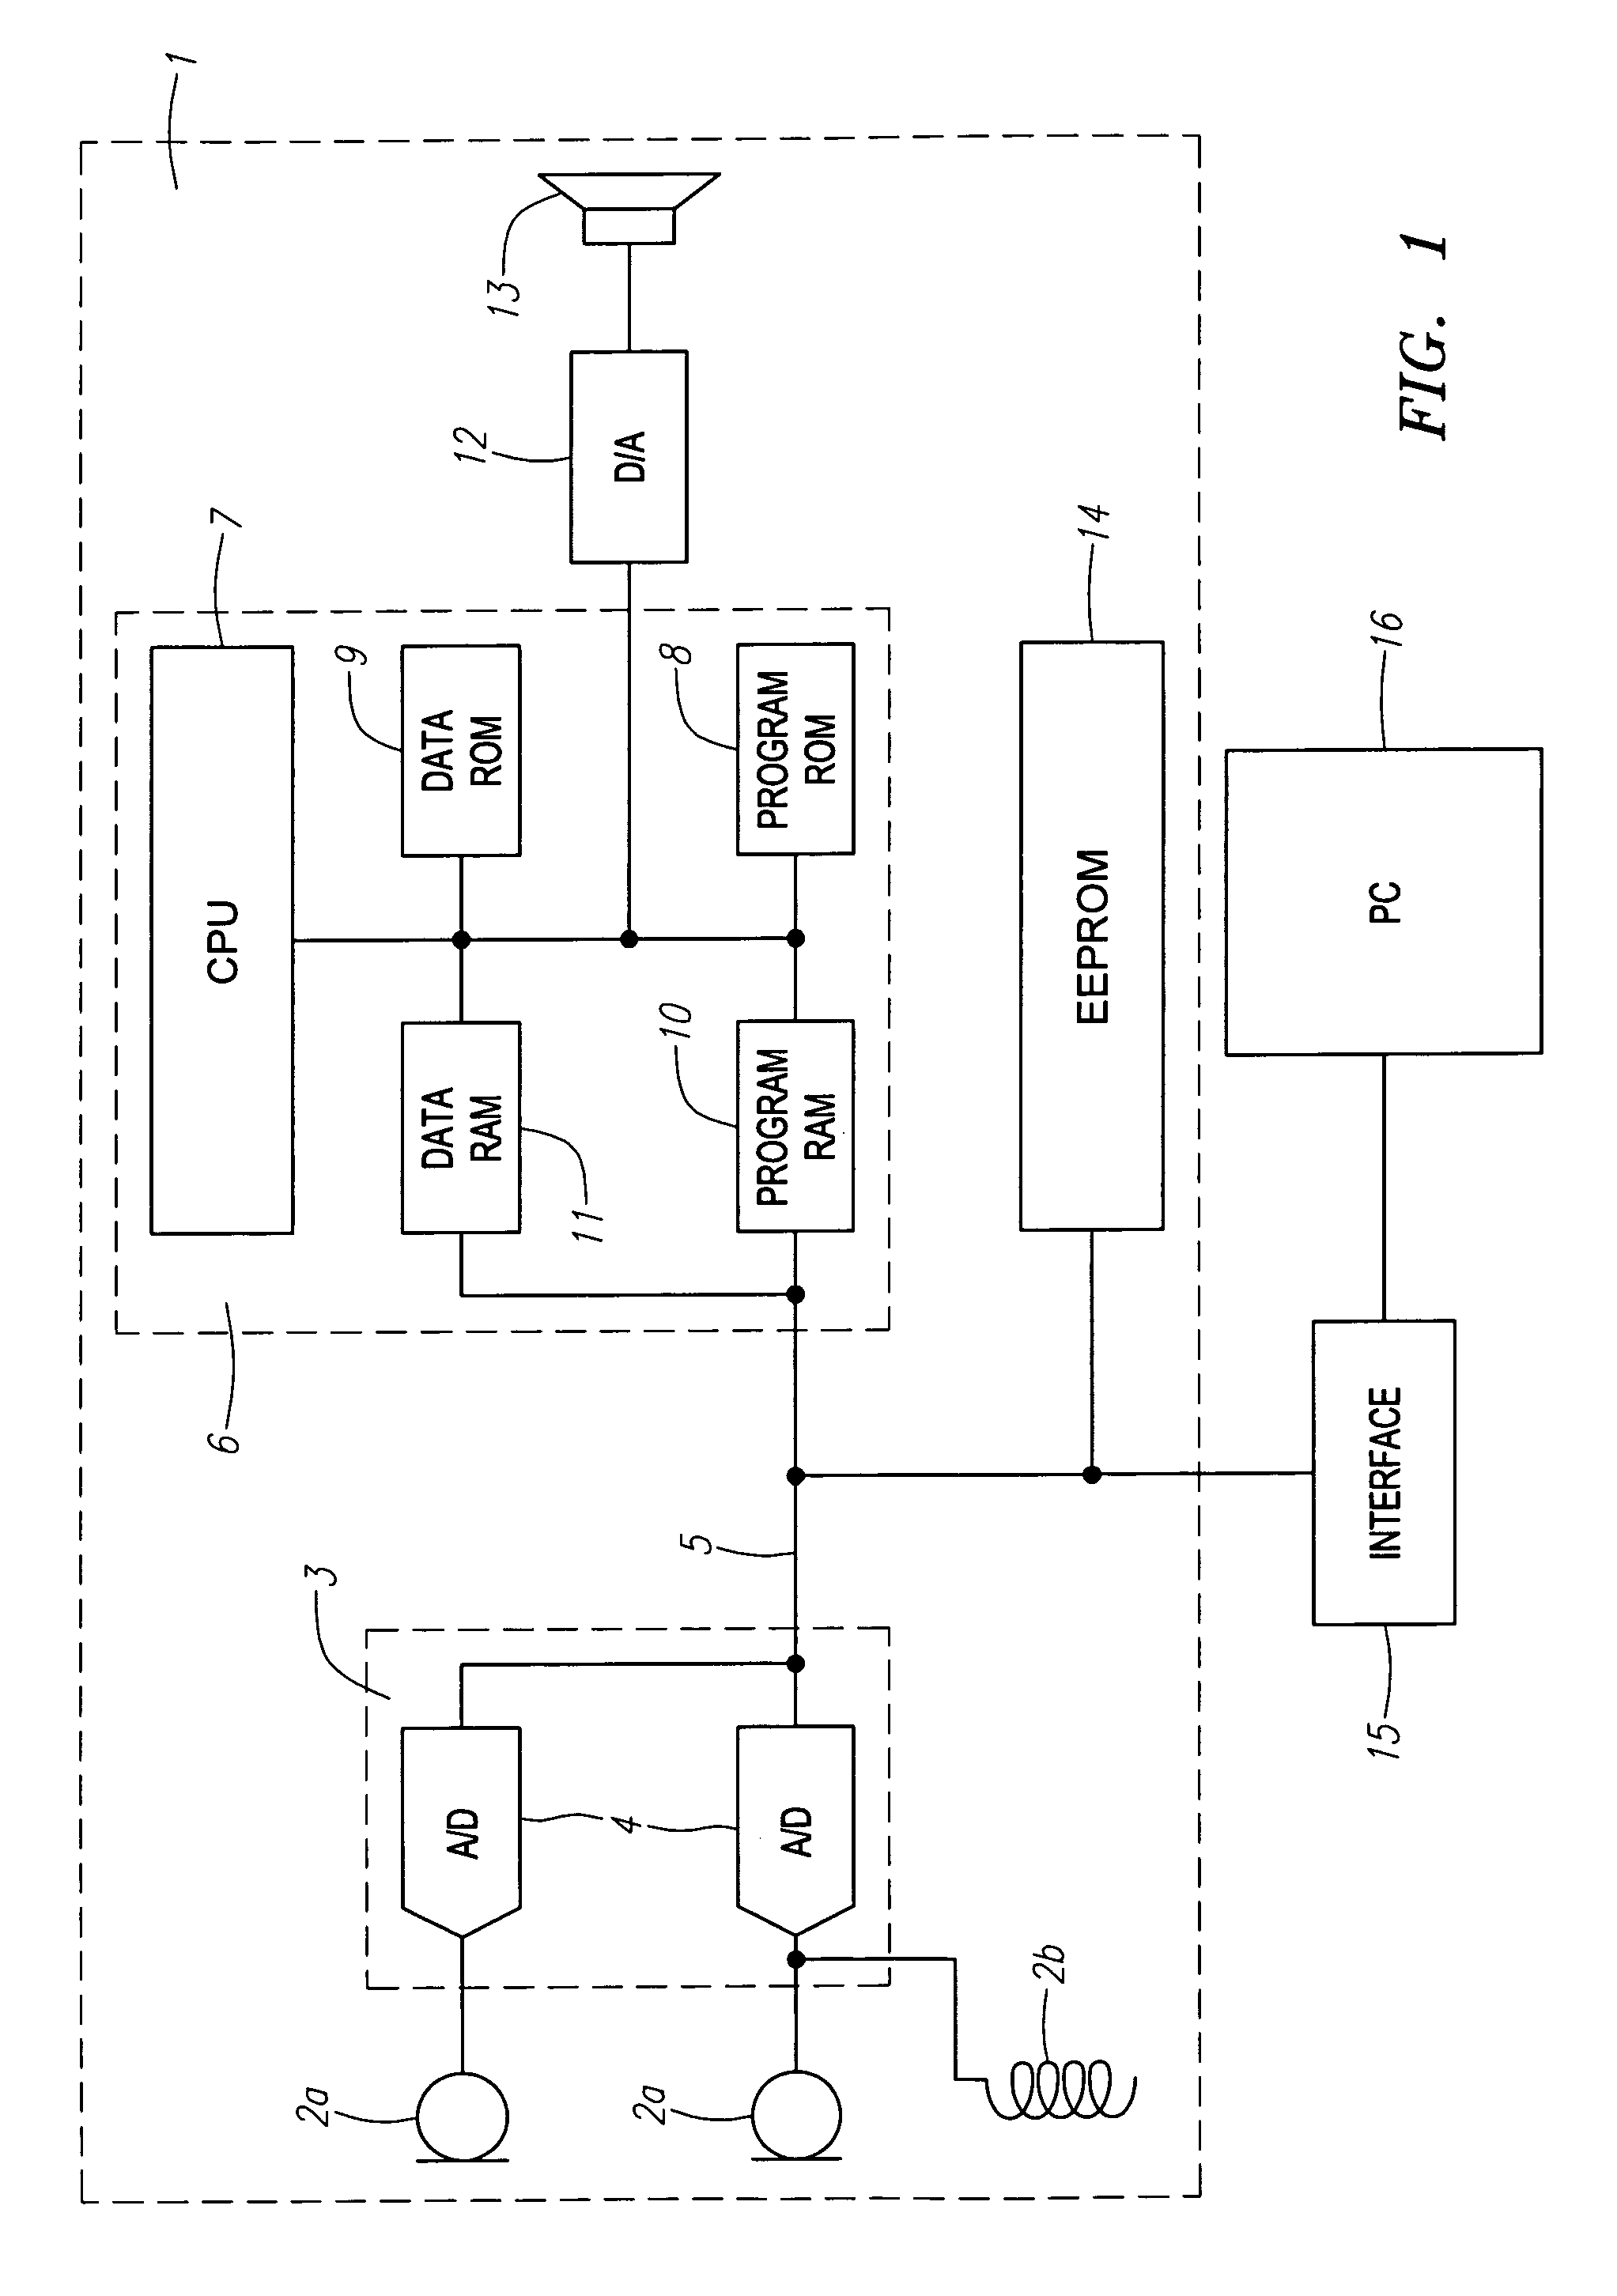 Hearing aid with delayed activation